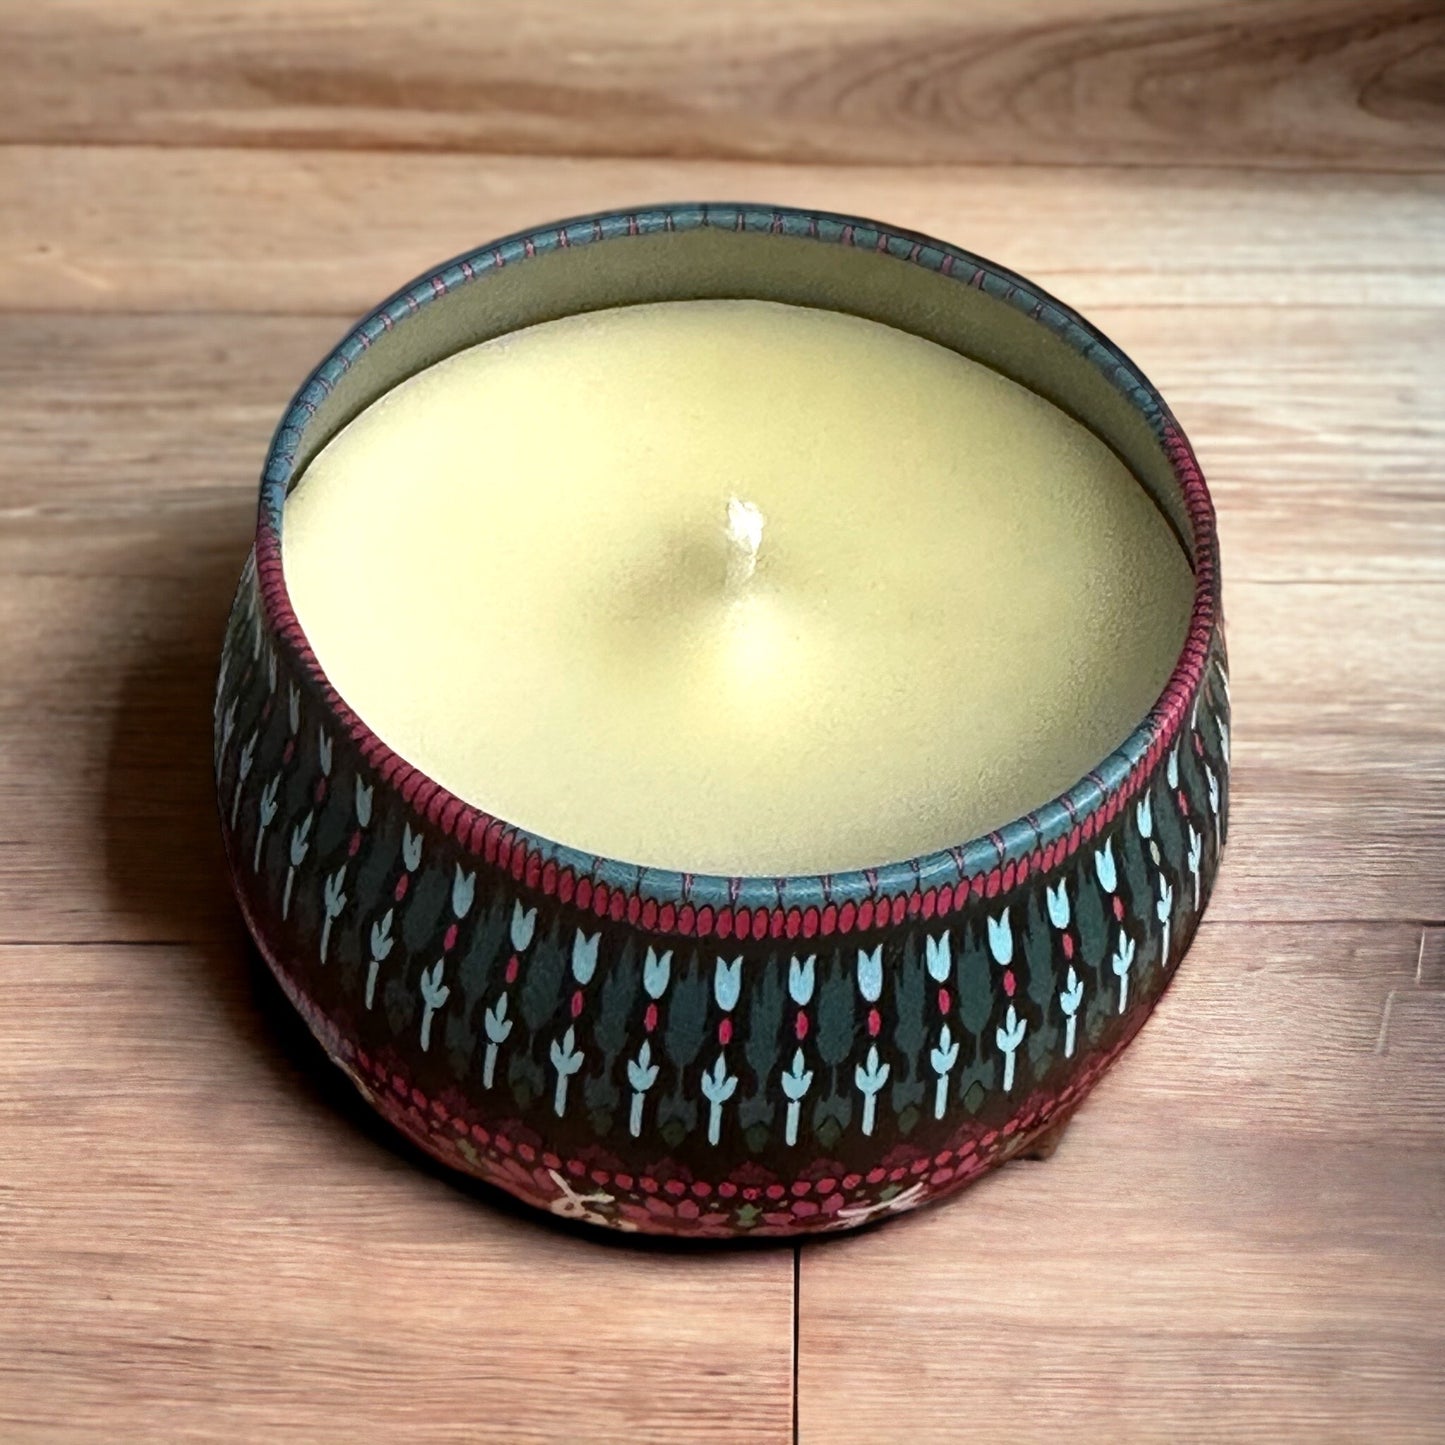 Beeswax Candles - 4 oz